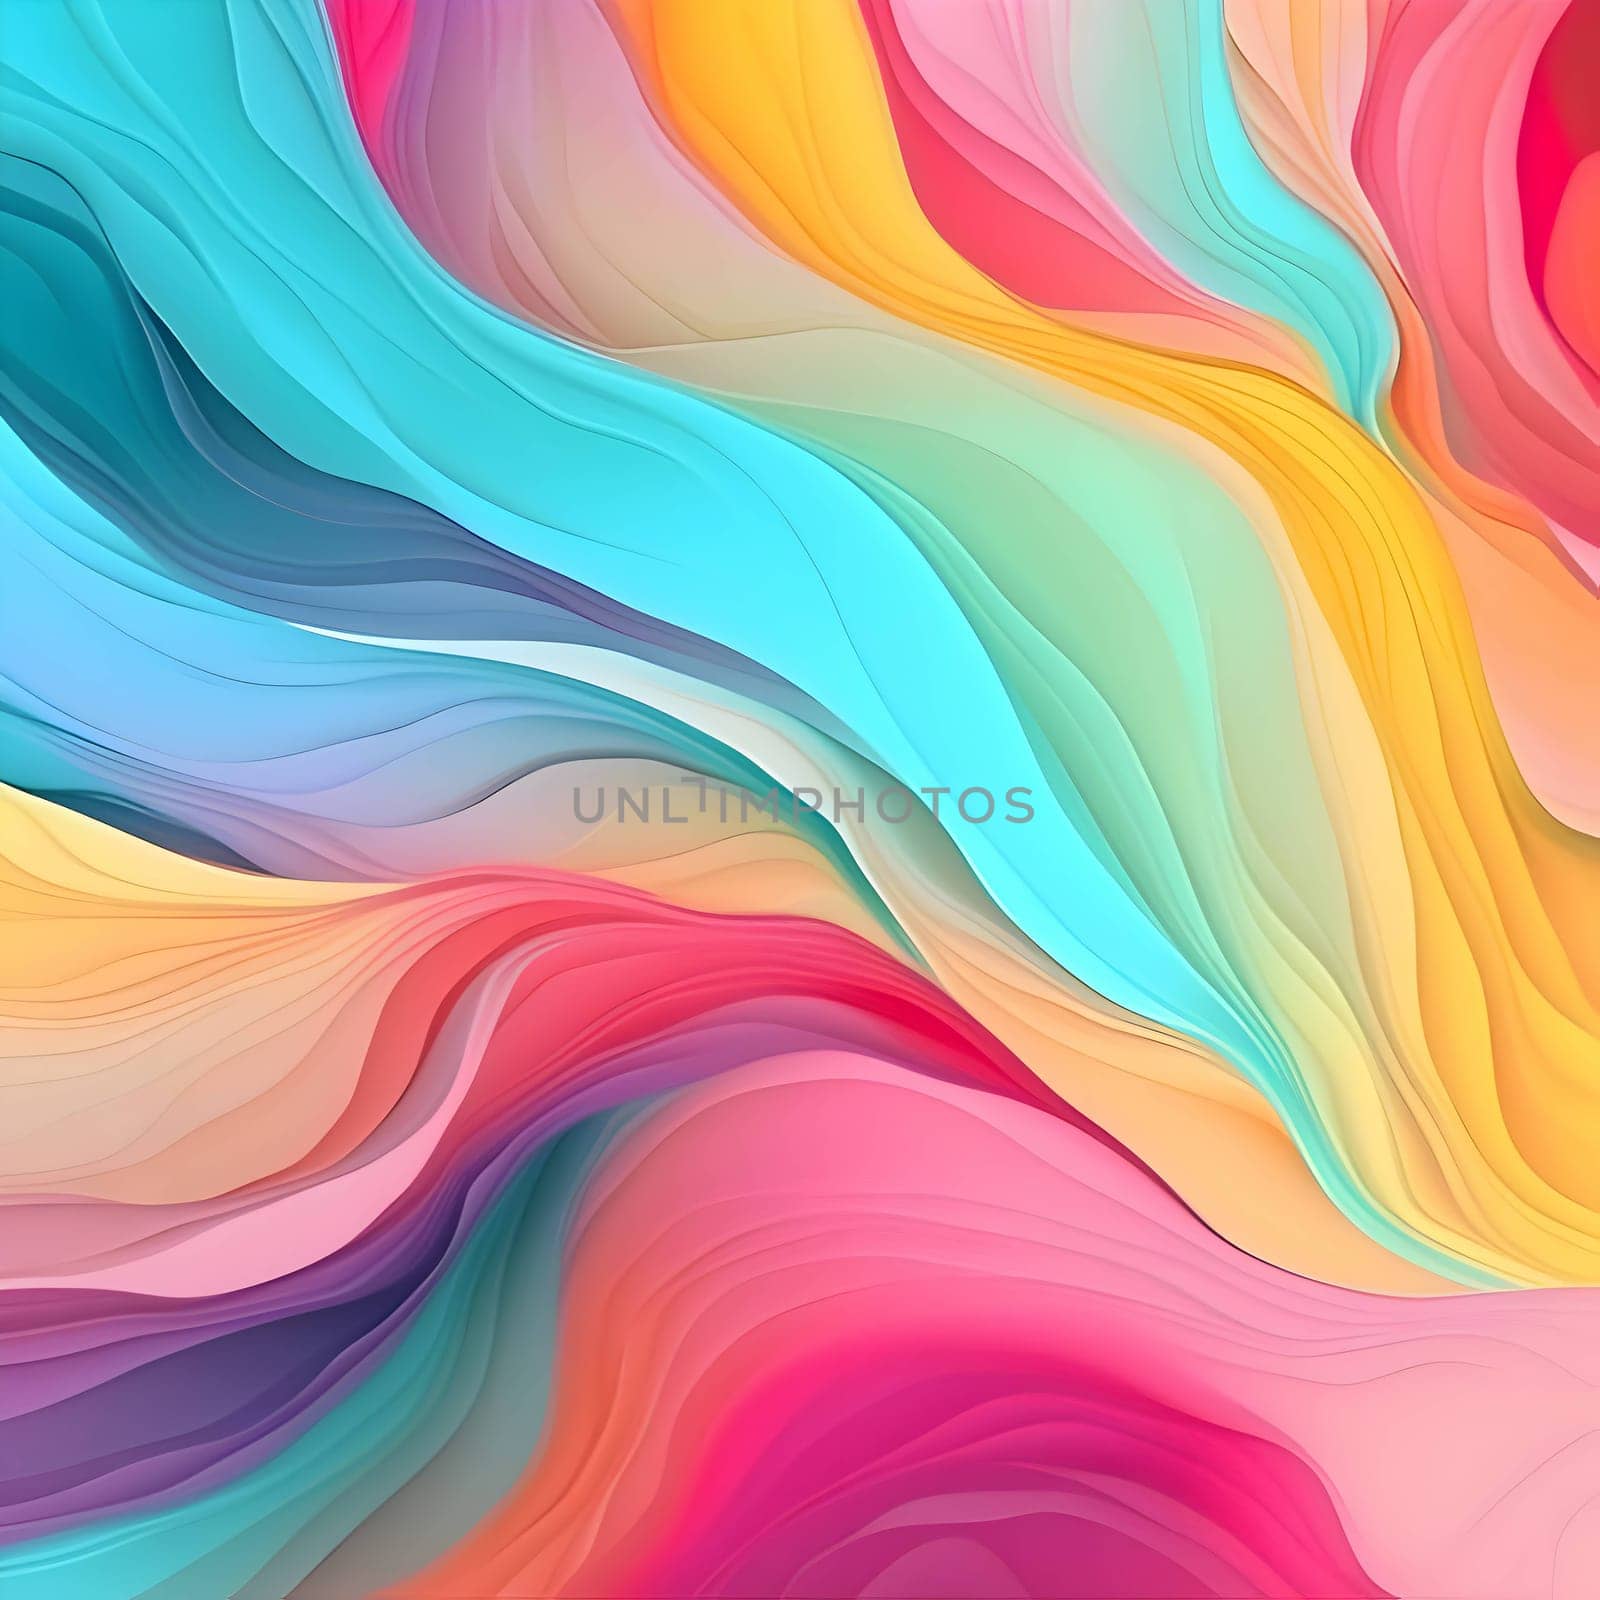 Vivid watercolor waves along with 3D lines come together to create an engaging abstract background wallpaper.